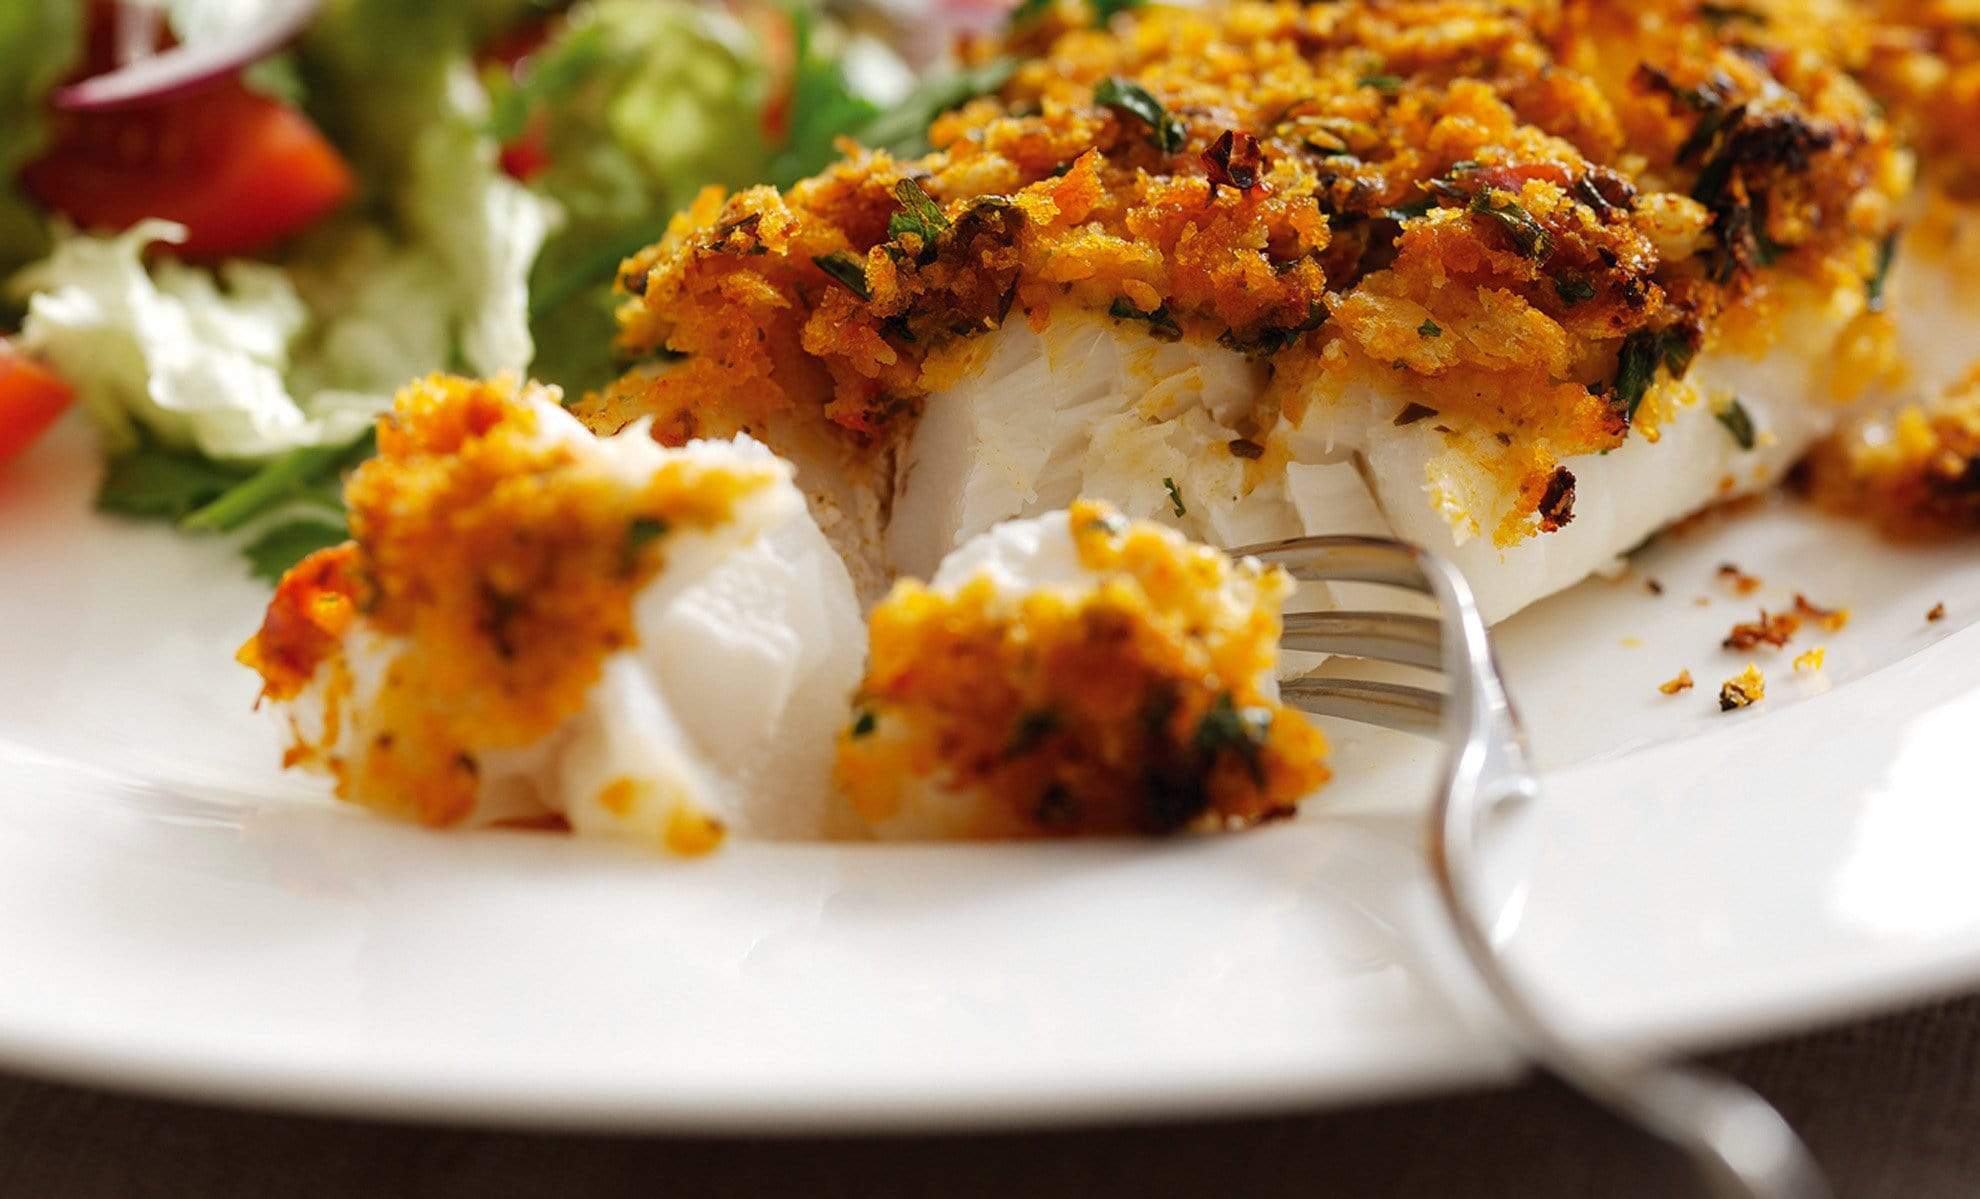 Baked Cod with Sun-Dried Tomato Pesto Crust